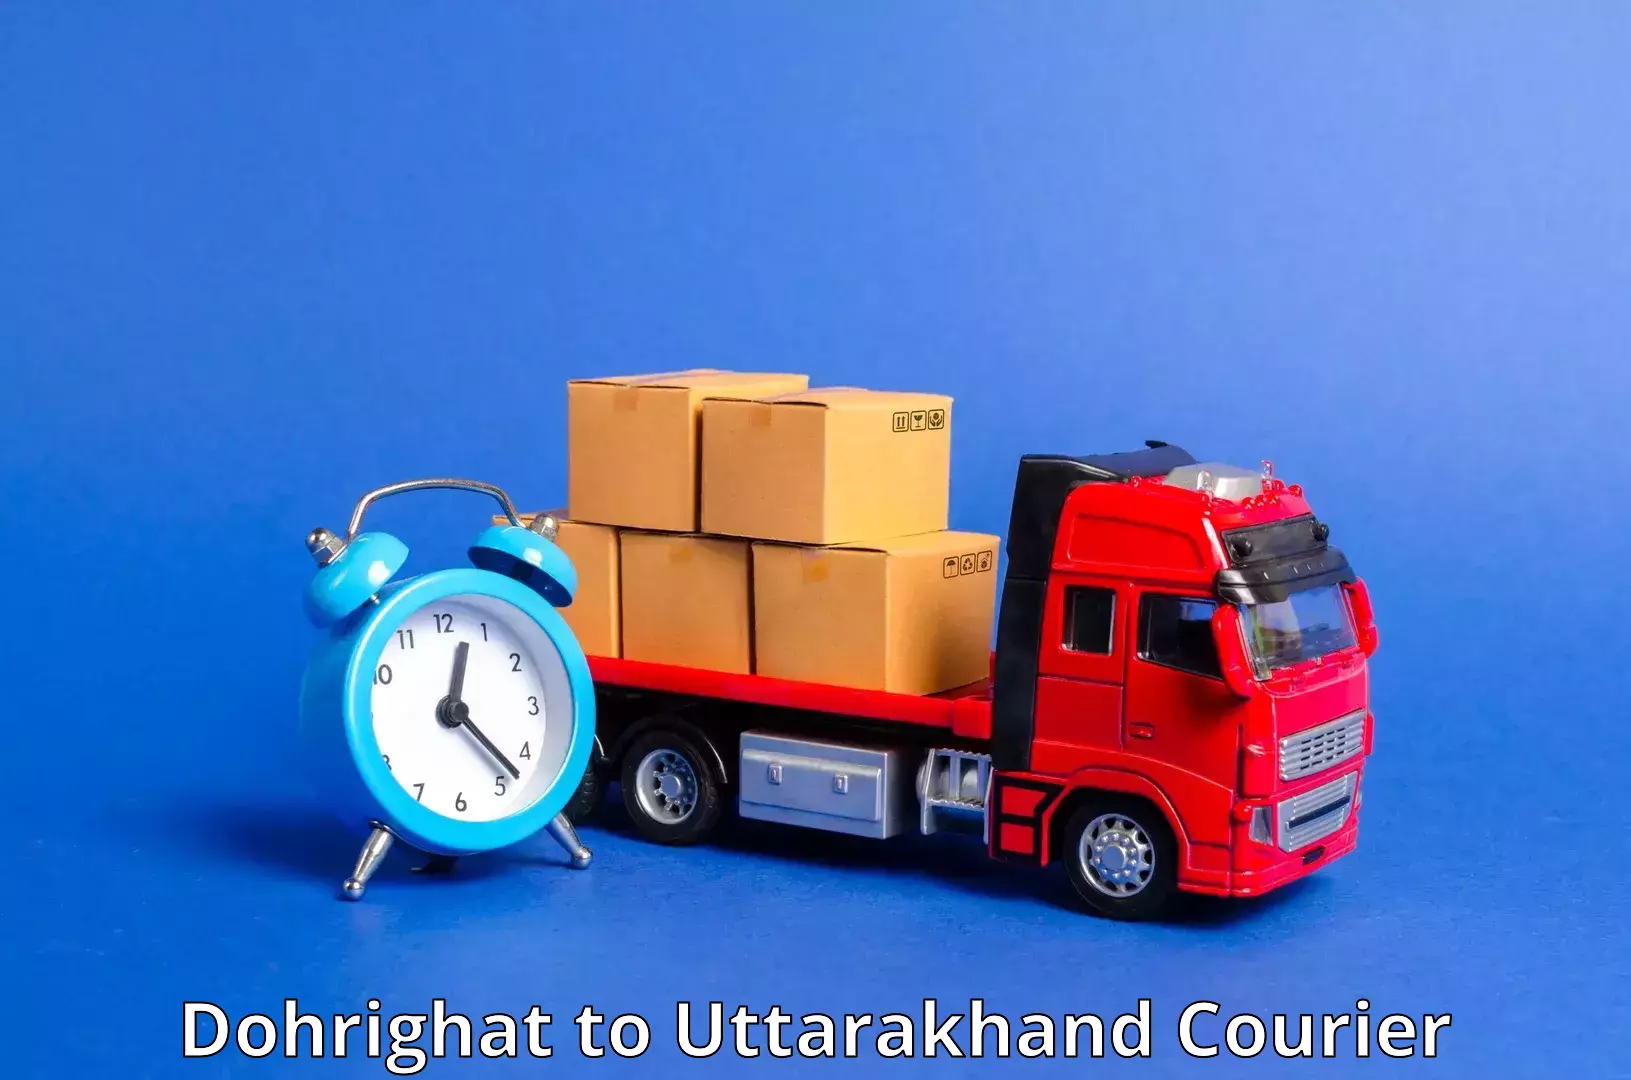 Personal courier services Dohrighat to Rudraprayag